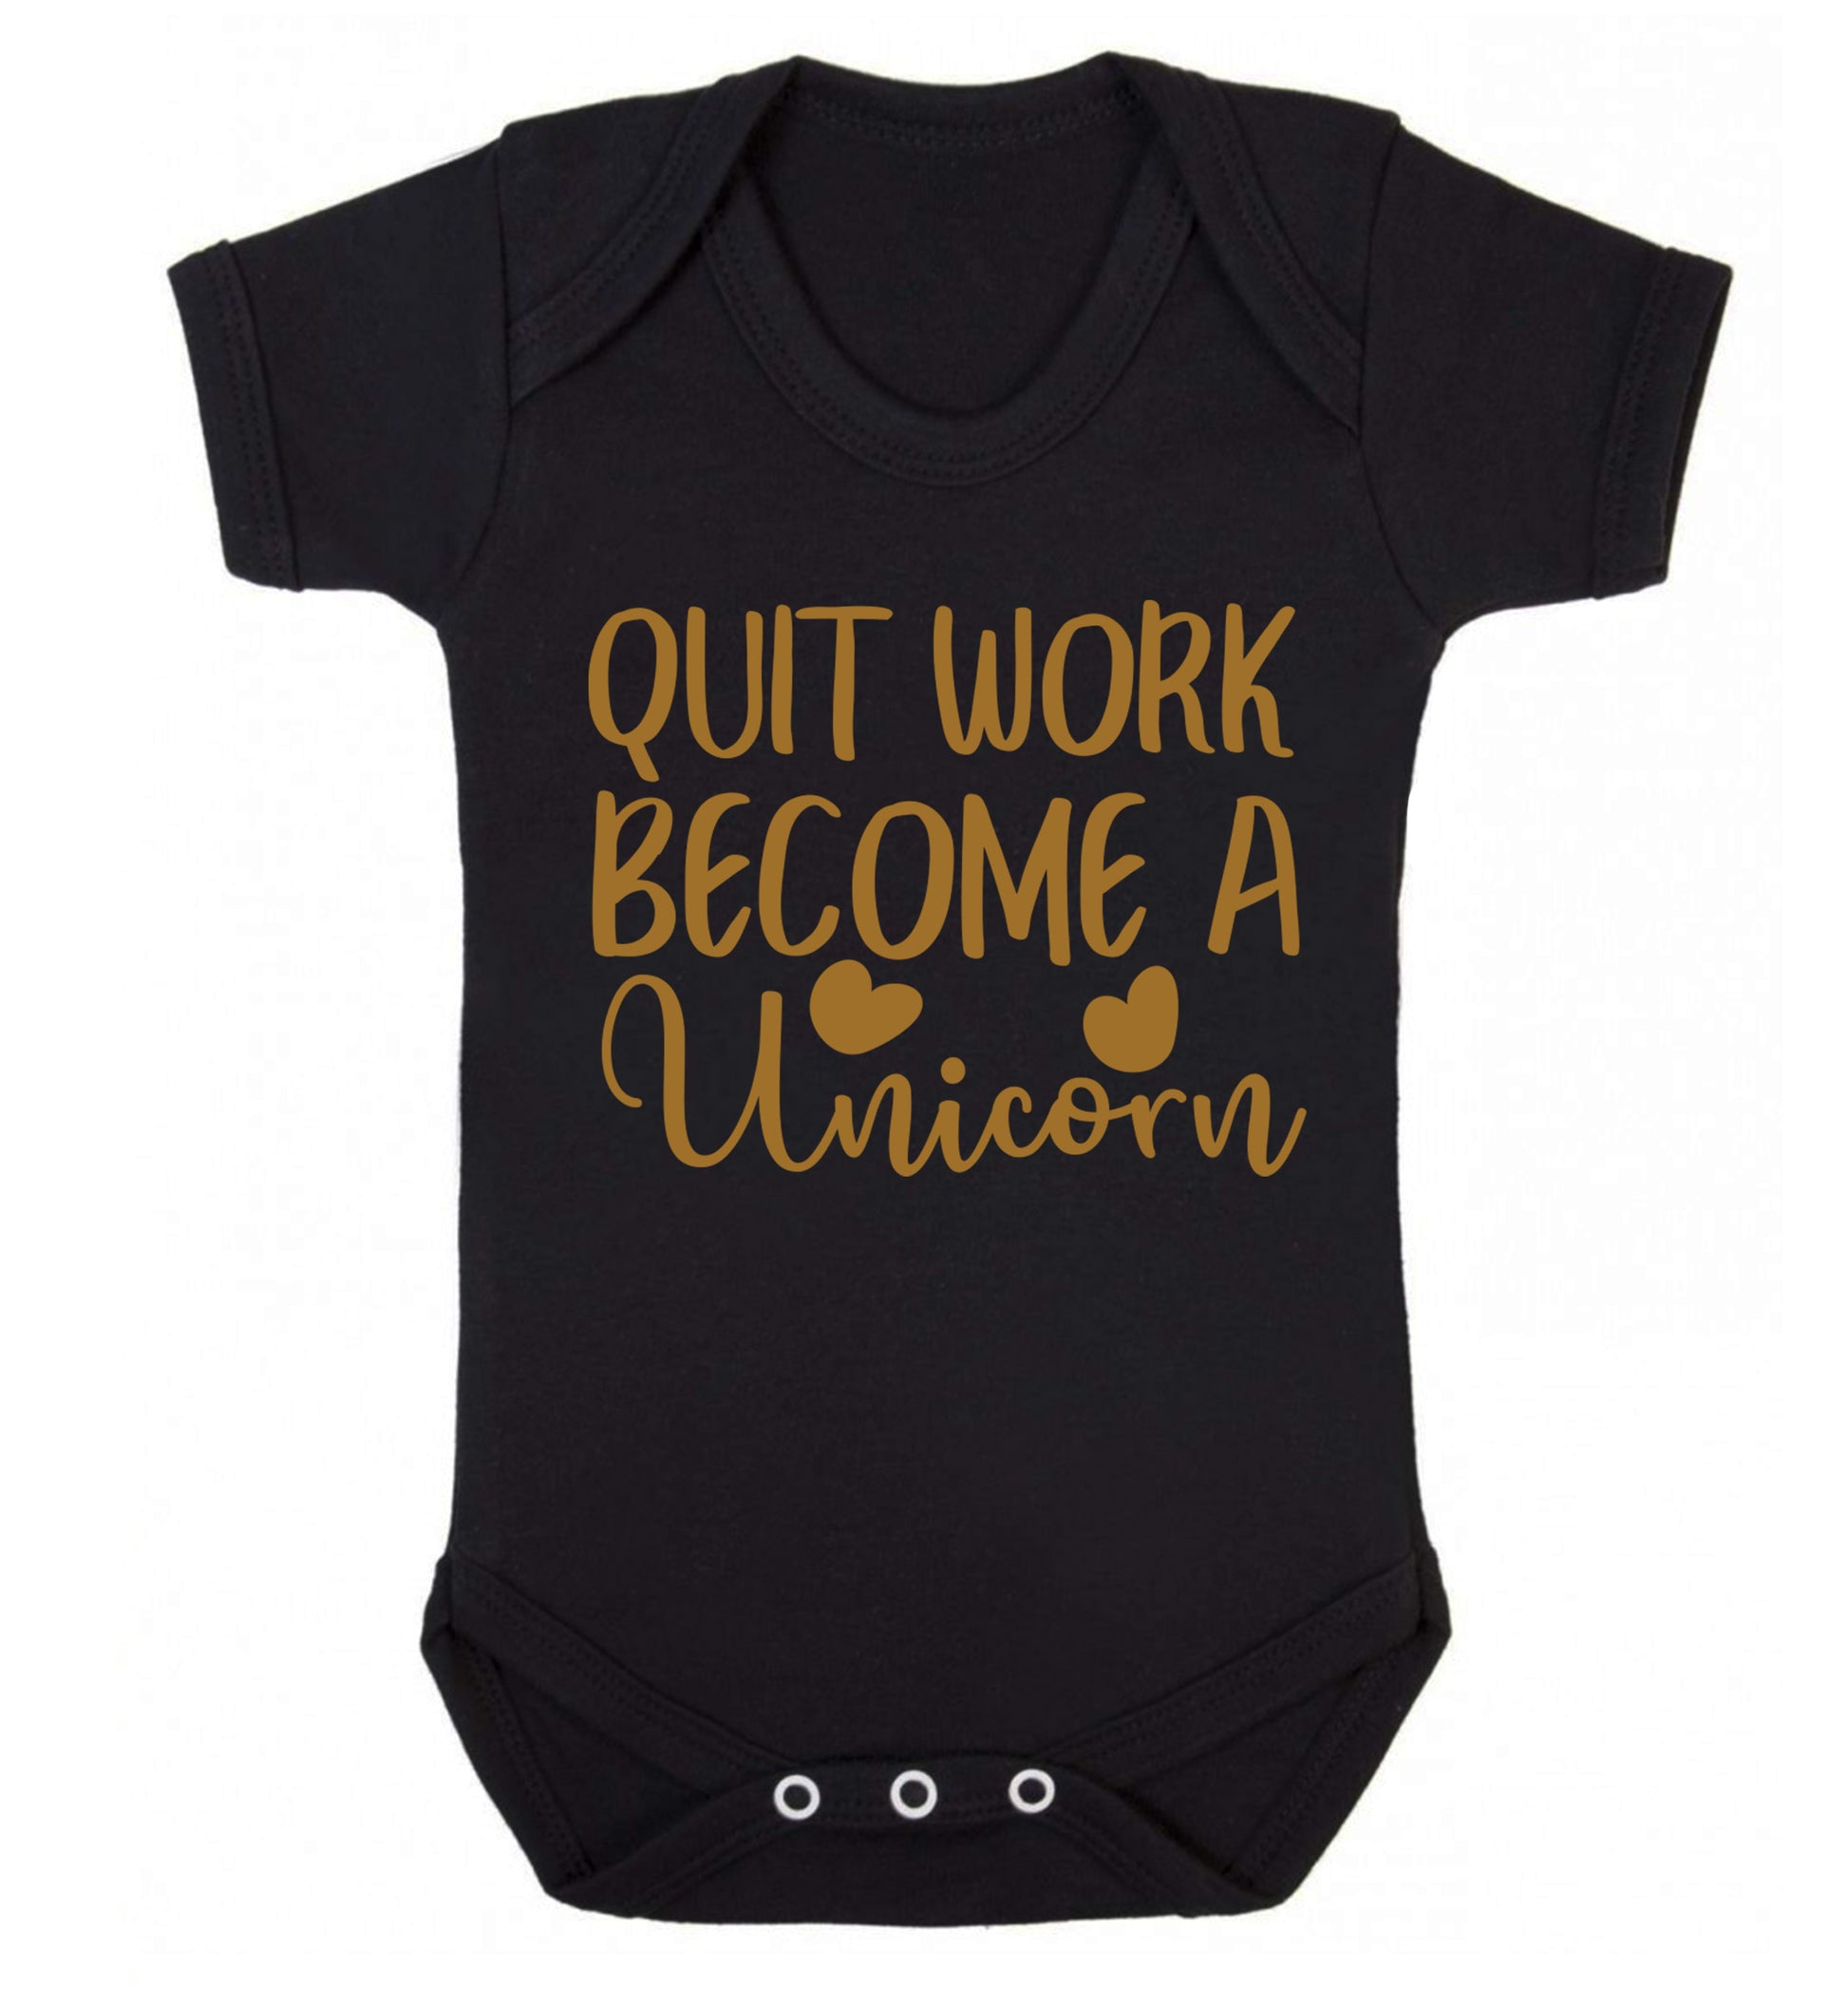 Quit work become a unicorn Baby Vest black 18-24 months